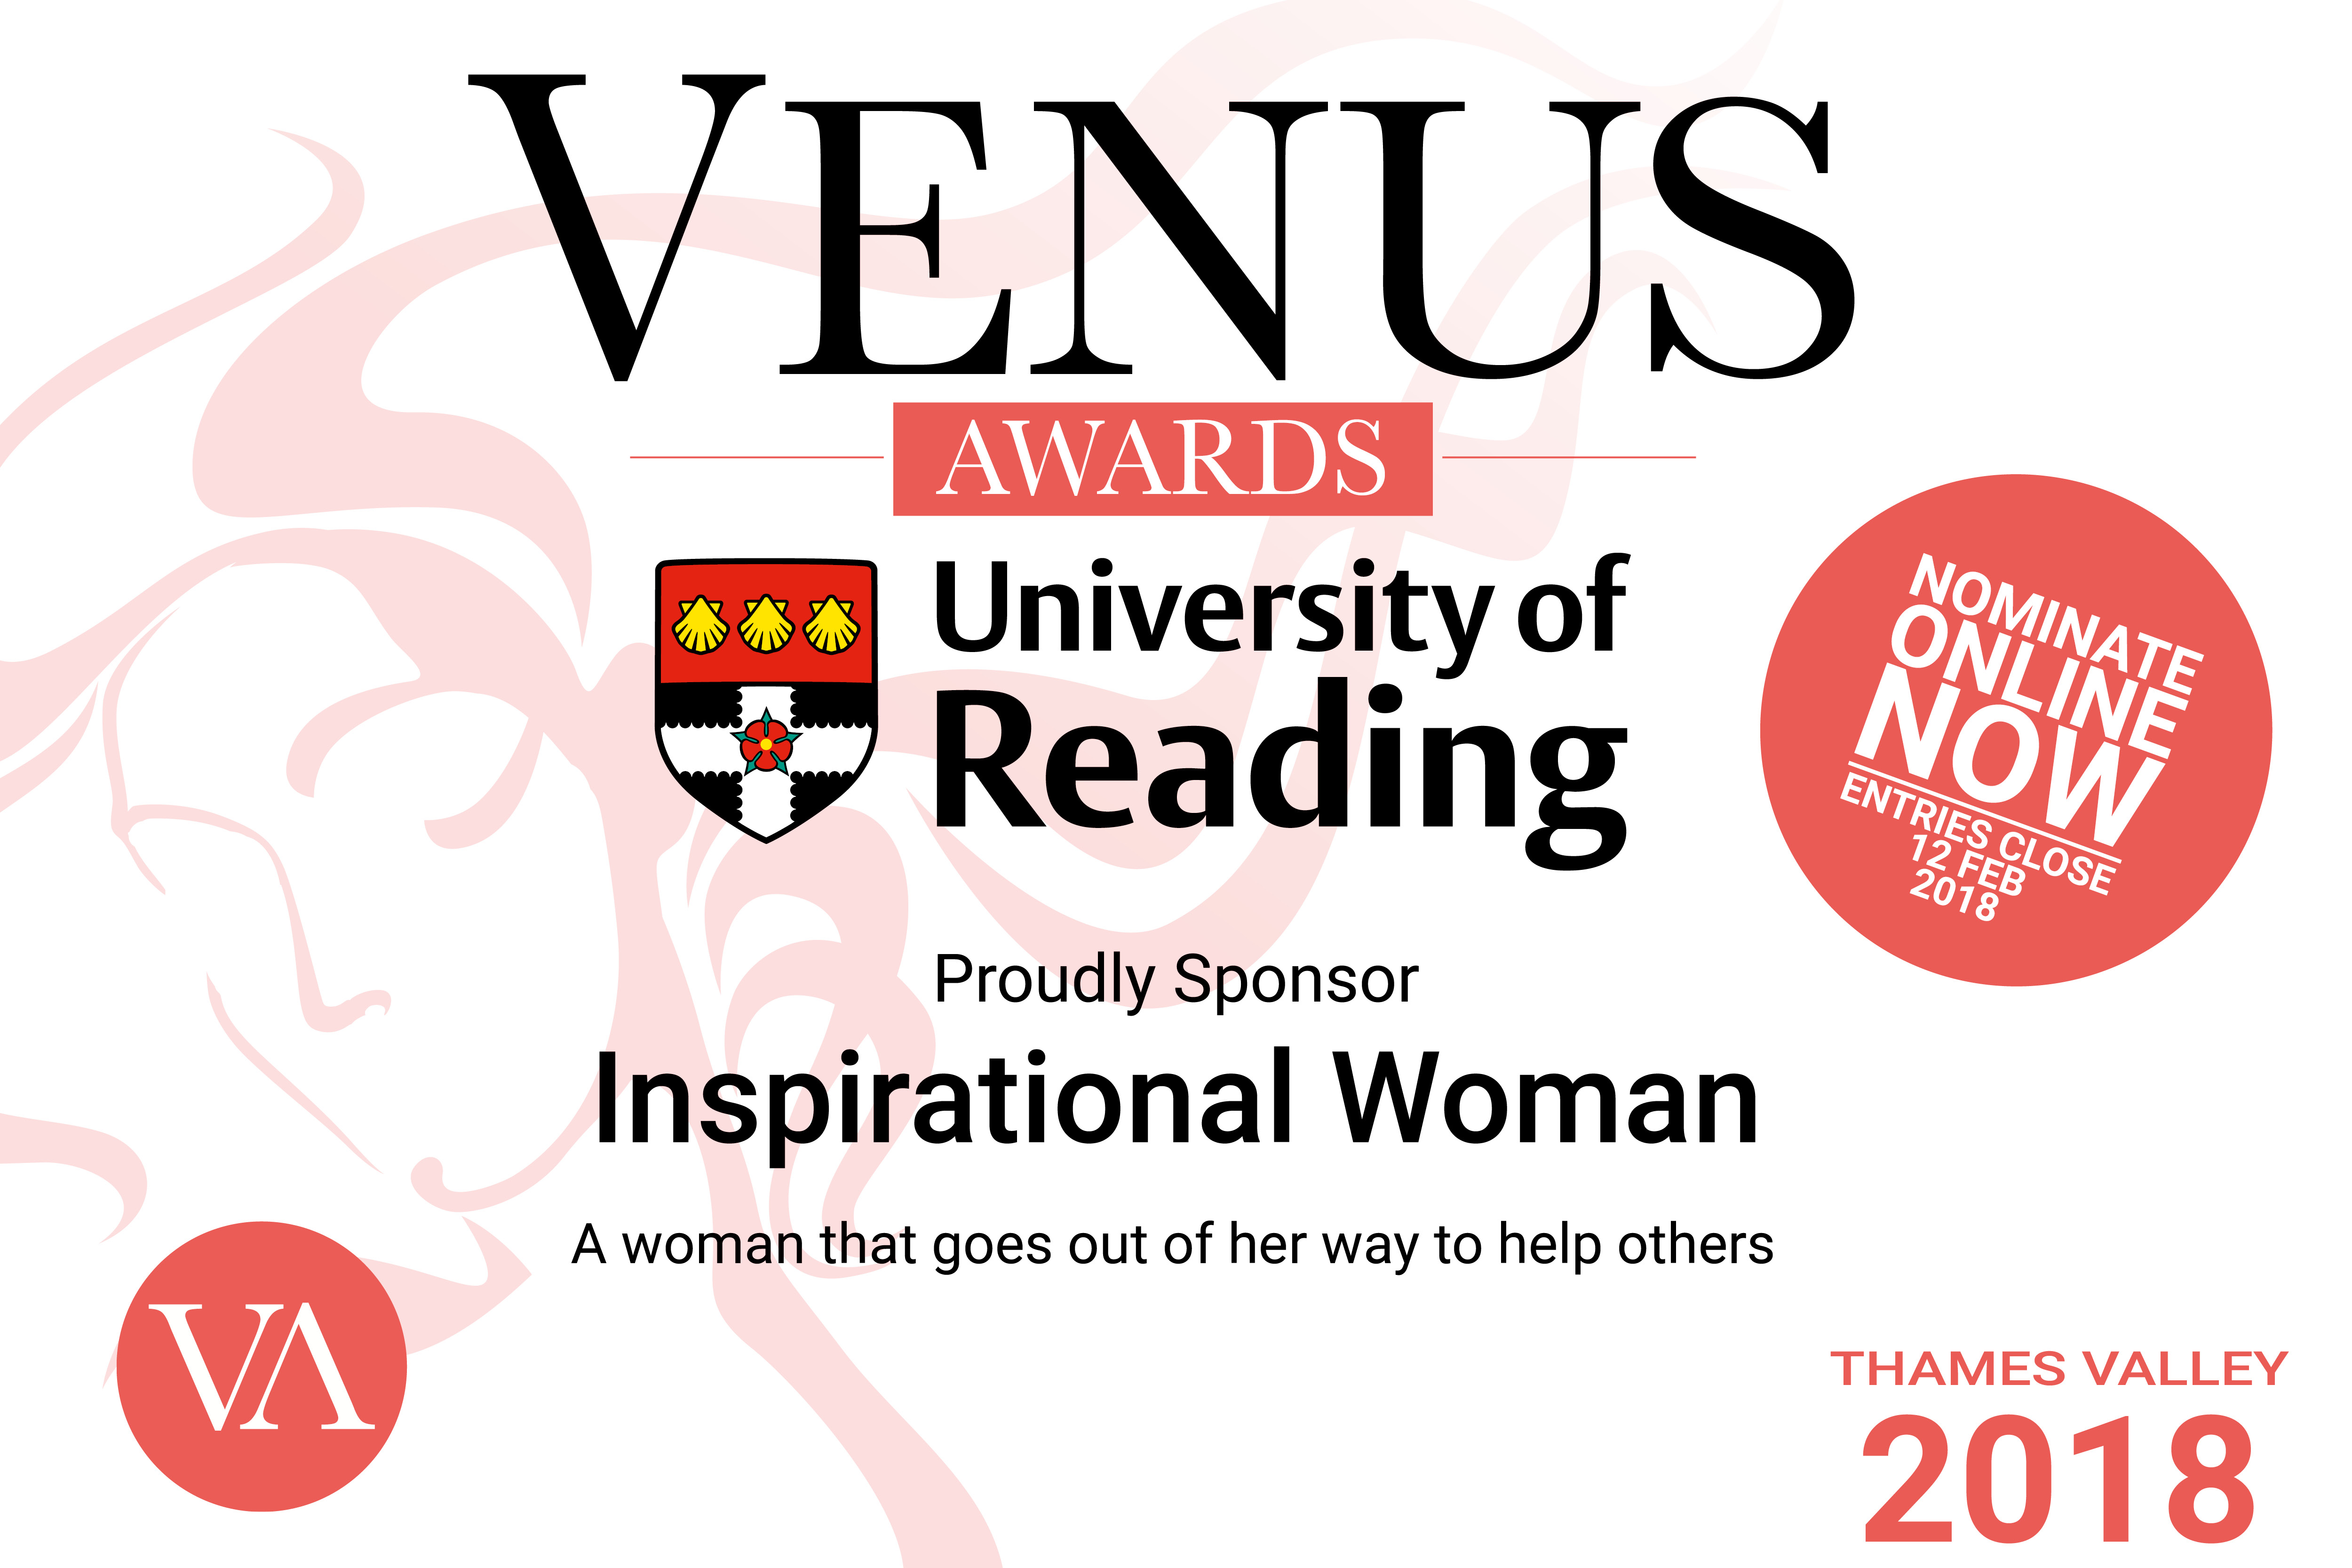 The University of Reading is again a Venus Awards sponsor